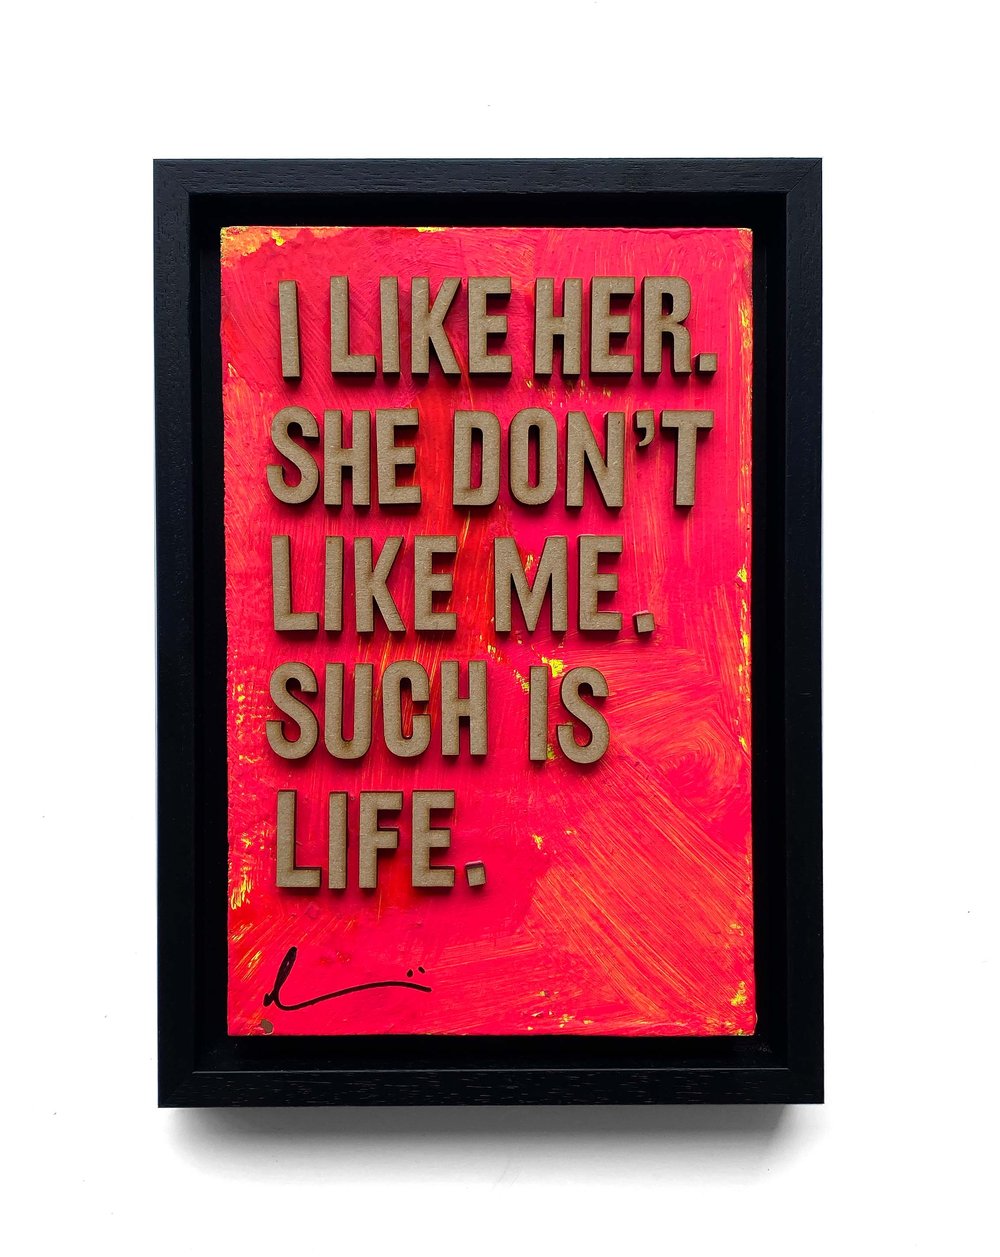 Image of 'I like her. She don't like me. Such is life.' by Hackney Dave